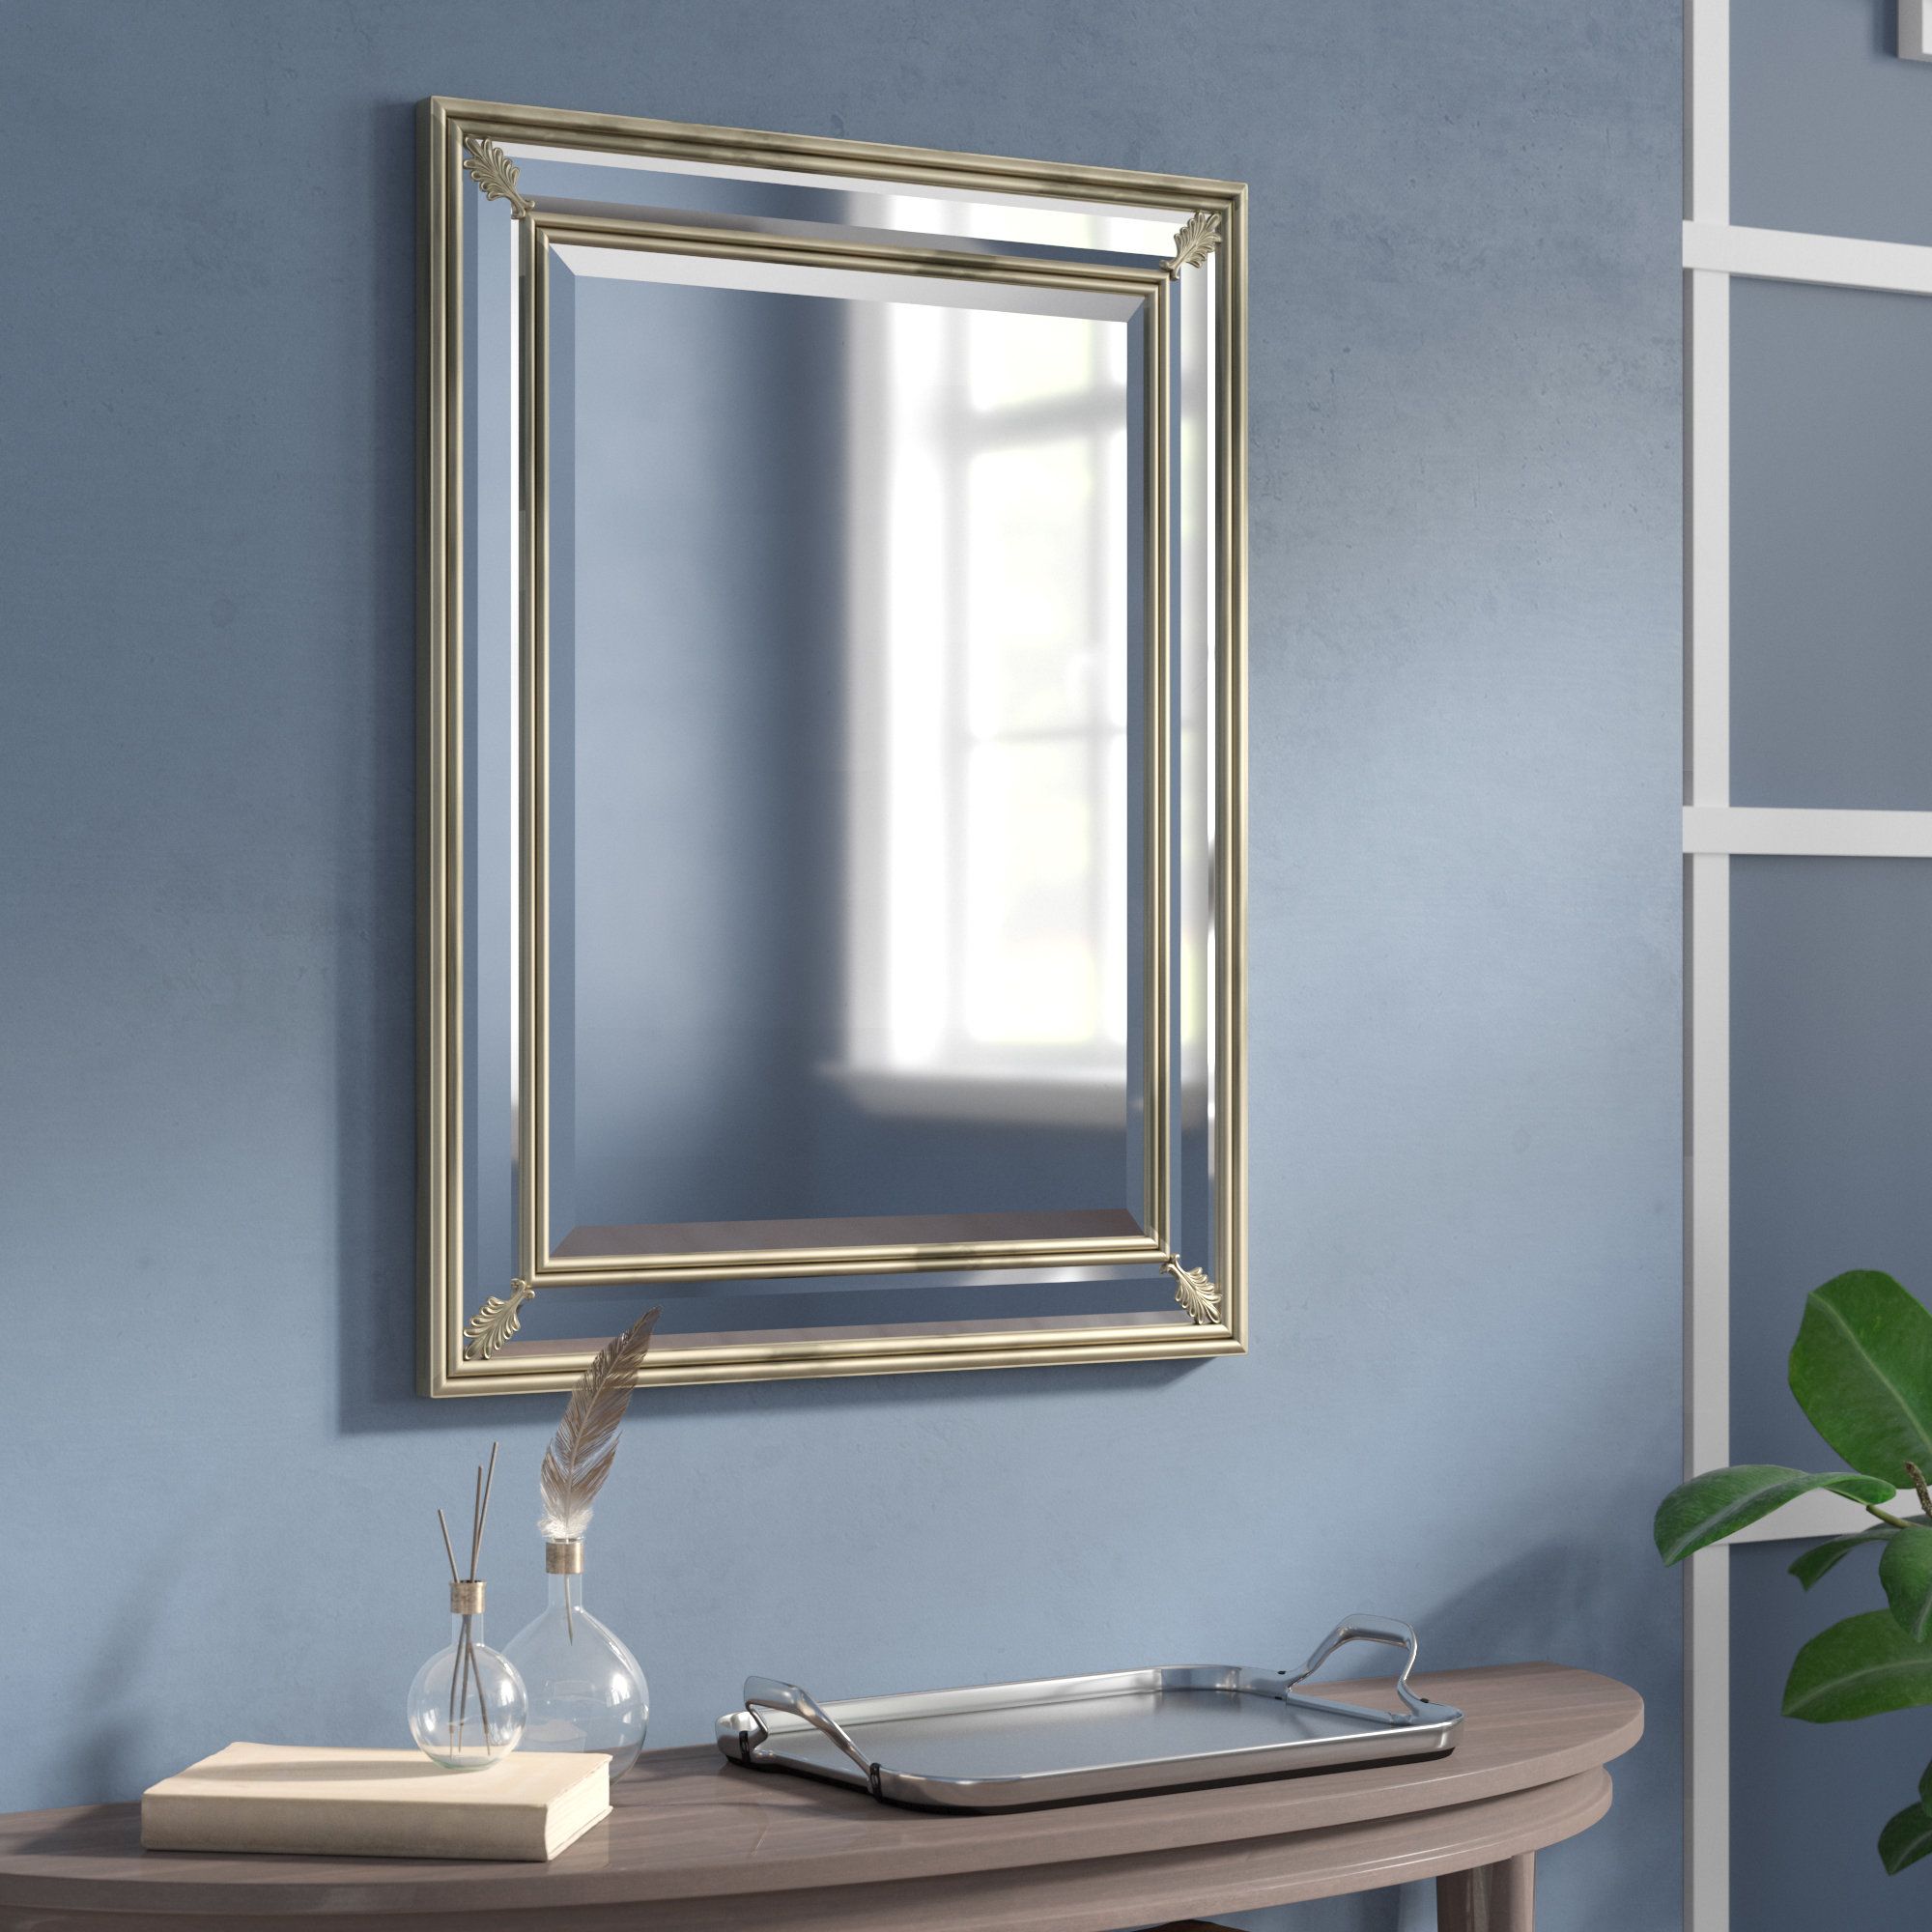 Darby Mirror | Wayfair For Owens Accent Mirrors (View 4 of 20)